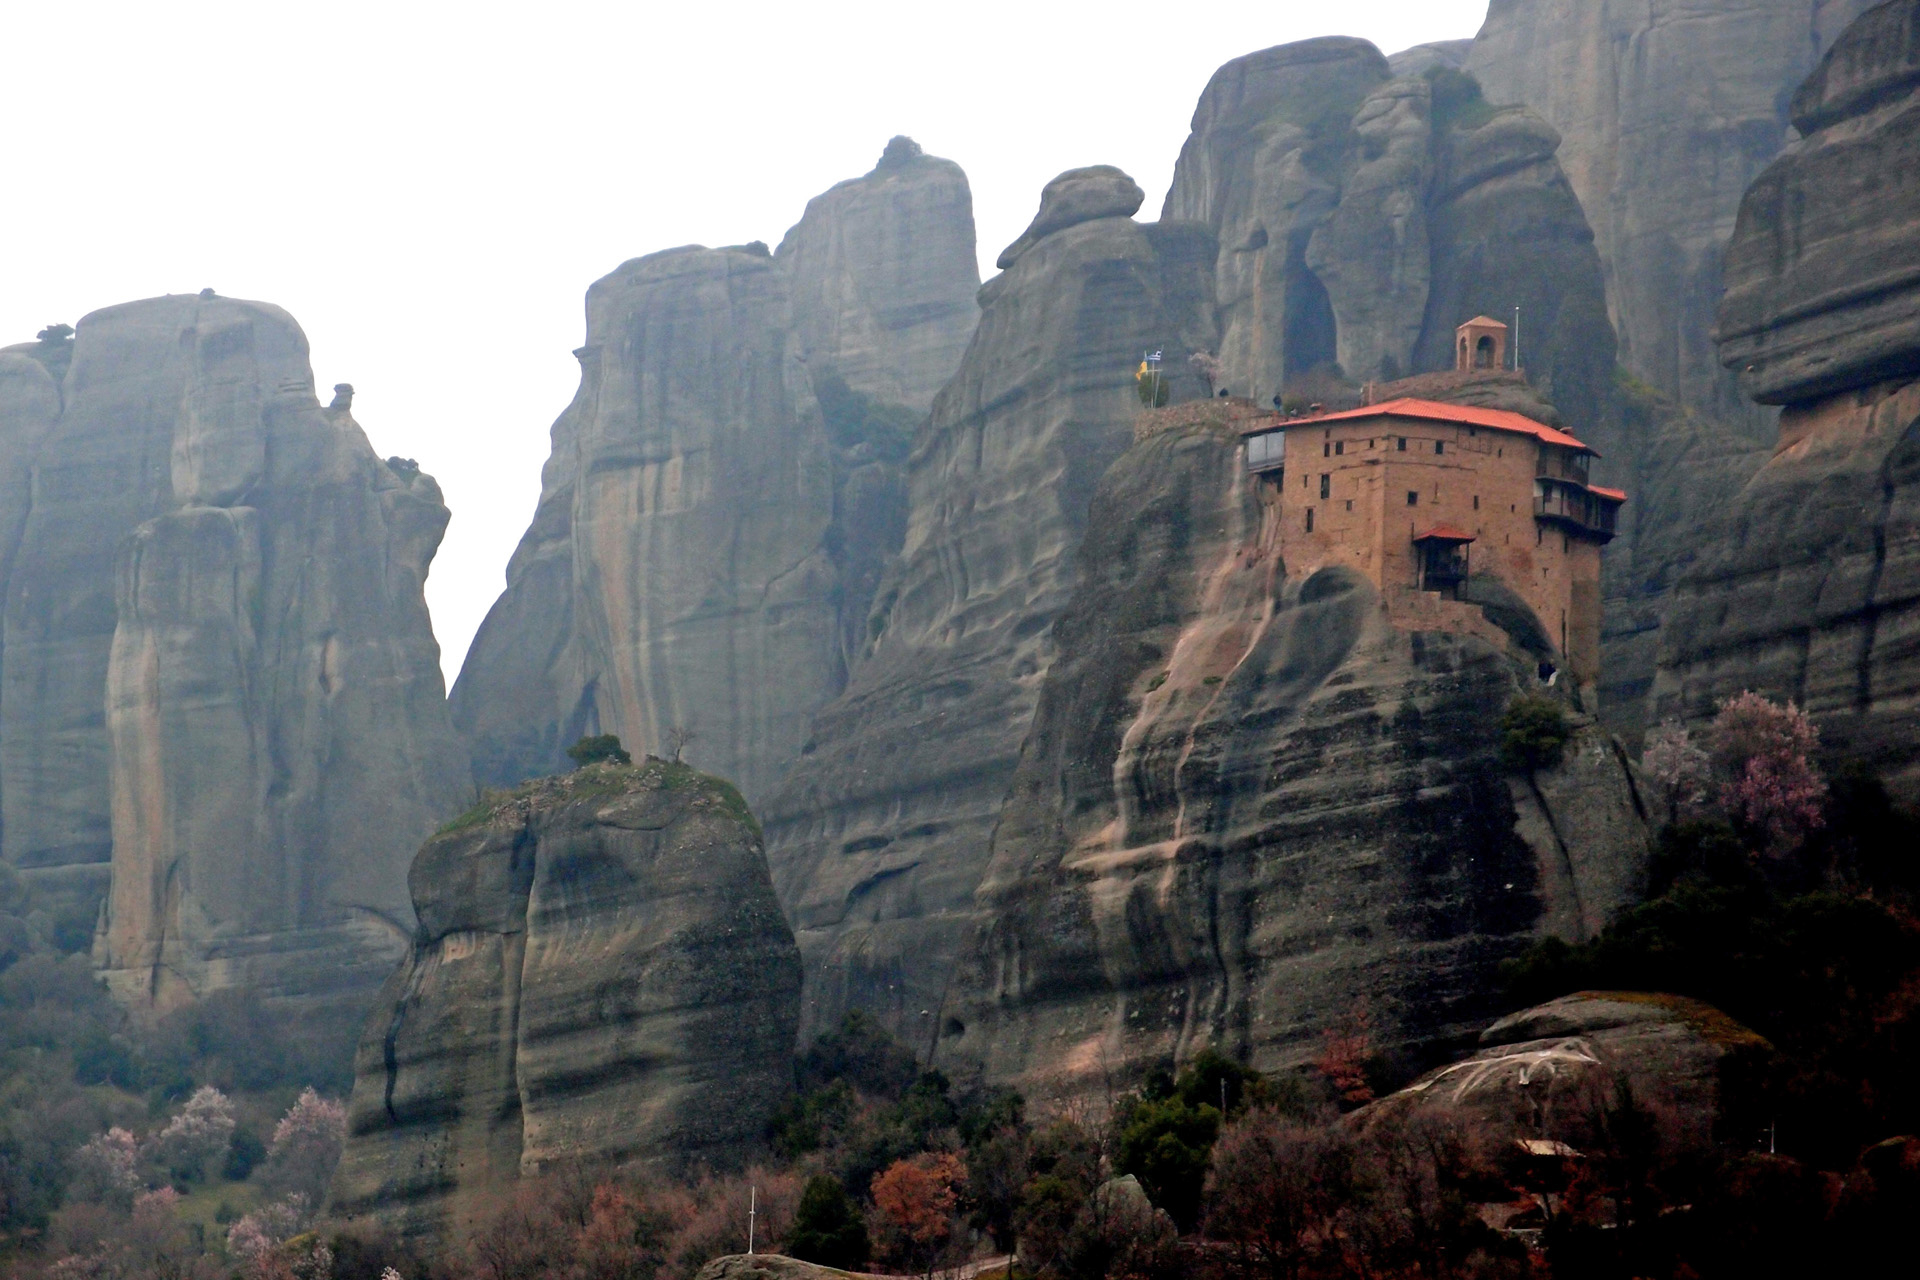 Meteora: one of six monasteries perched on conglomerate rock towers